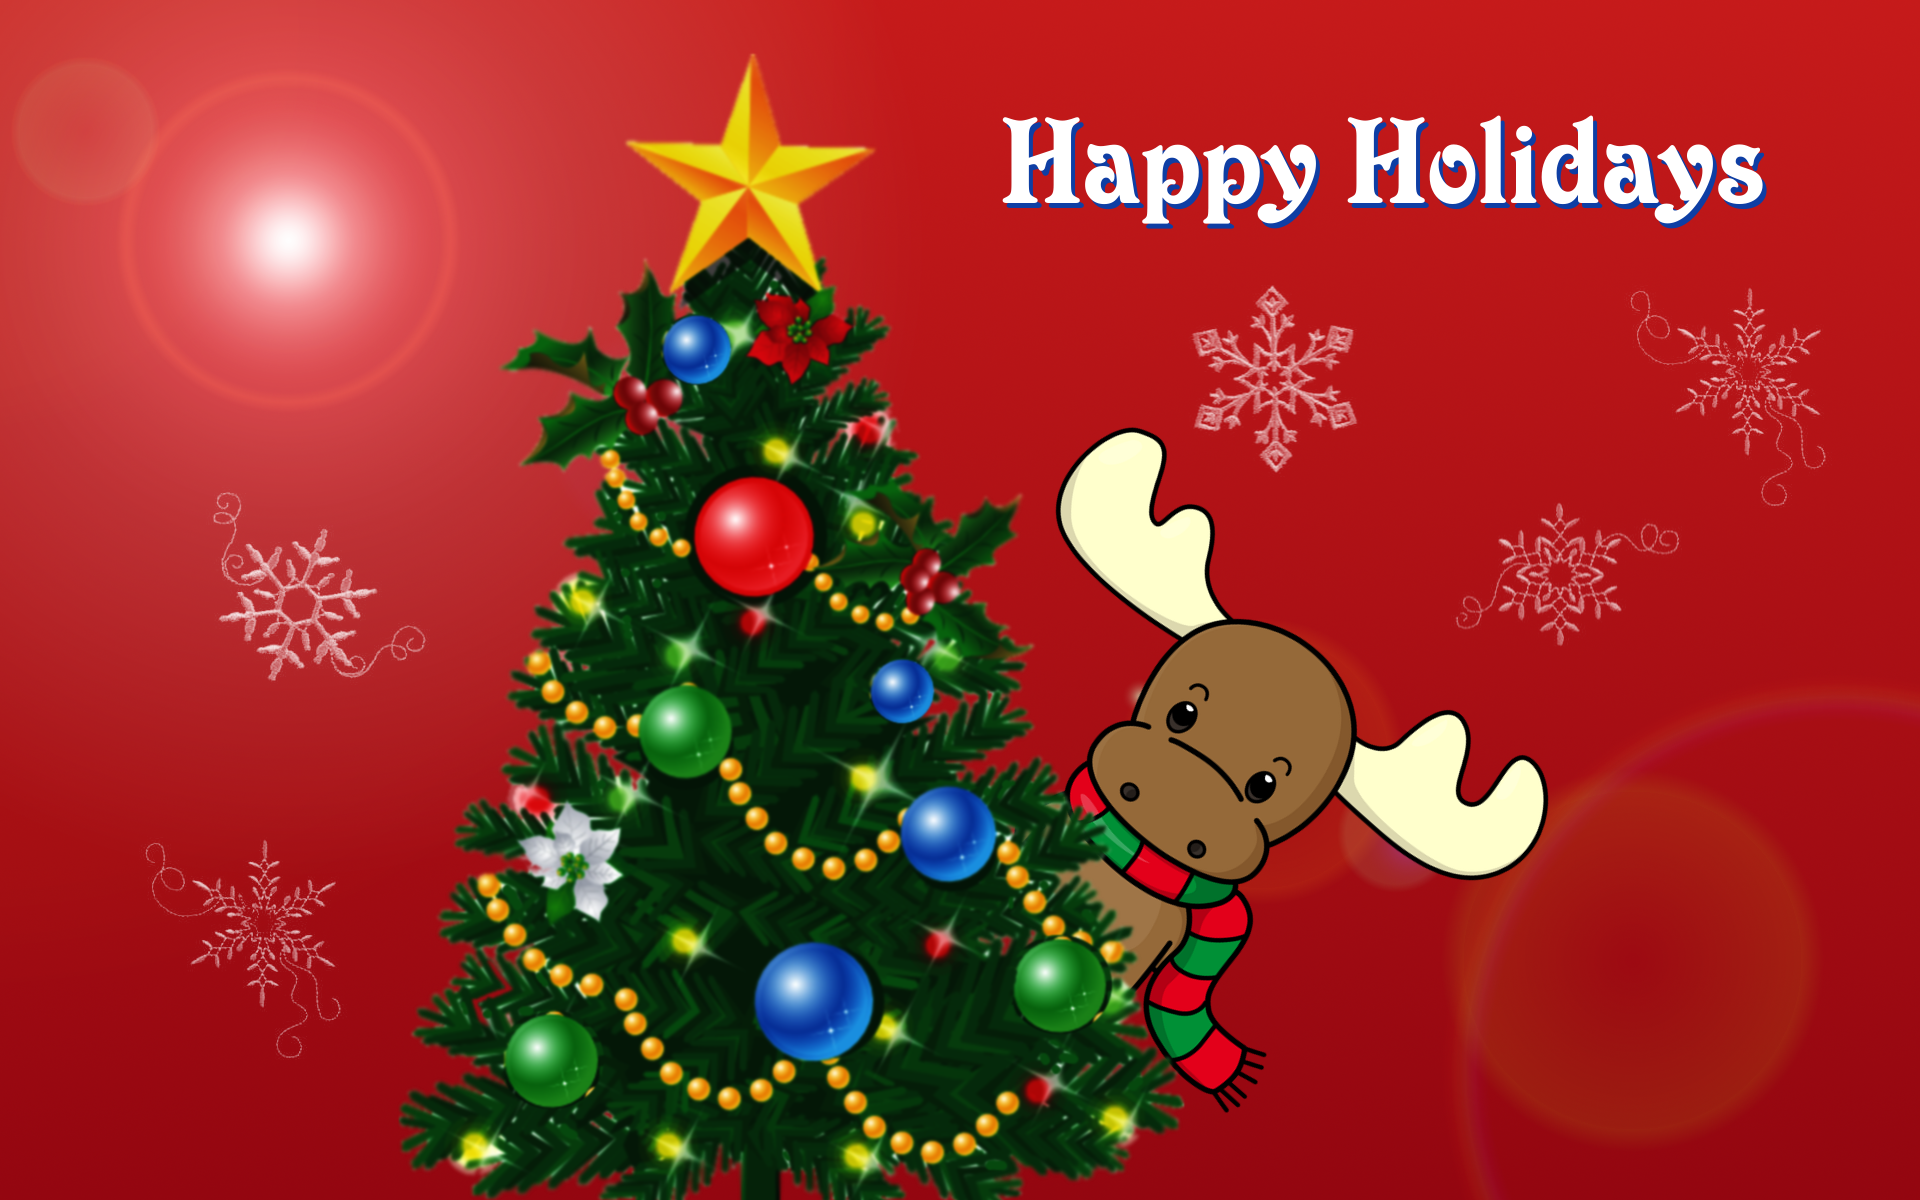 Have A Good Day Christmas Background - HD Wallpaper 